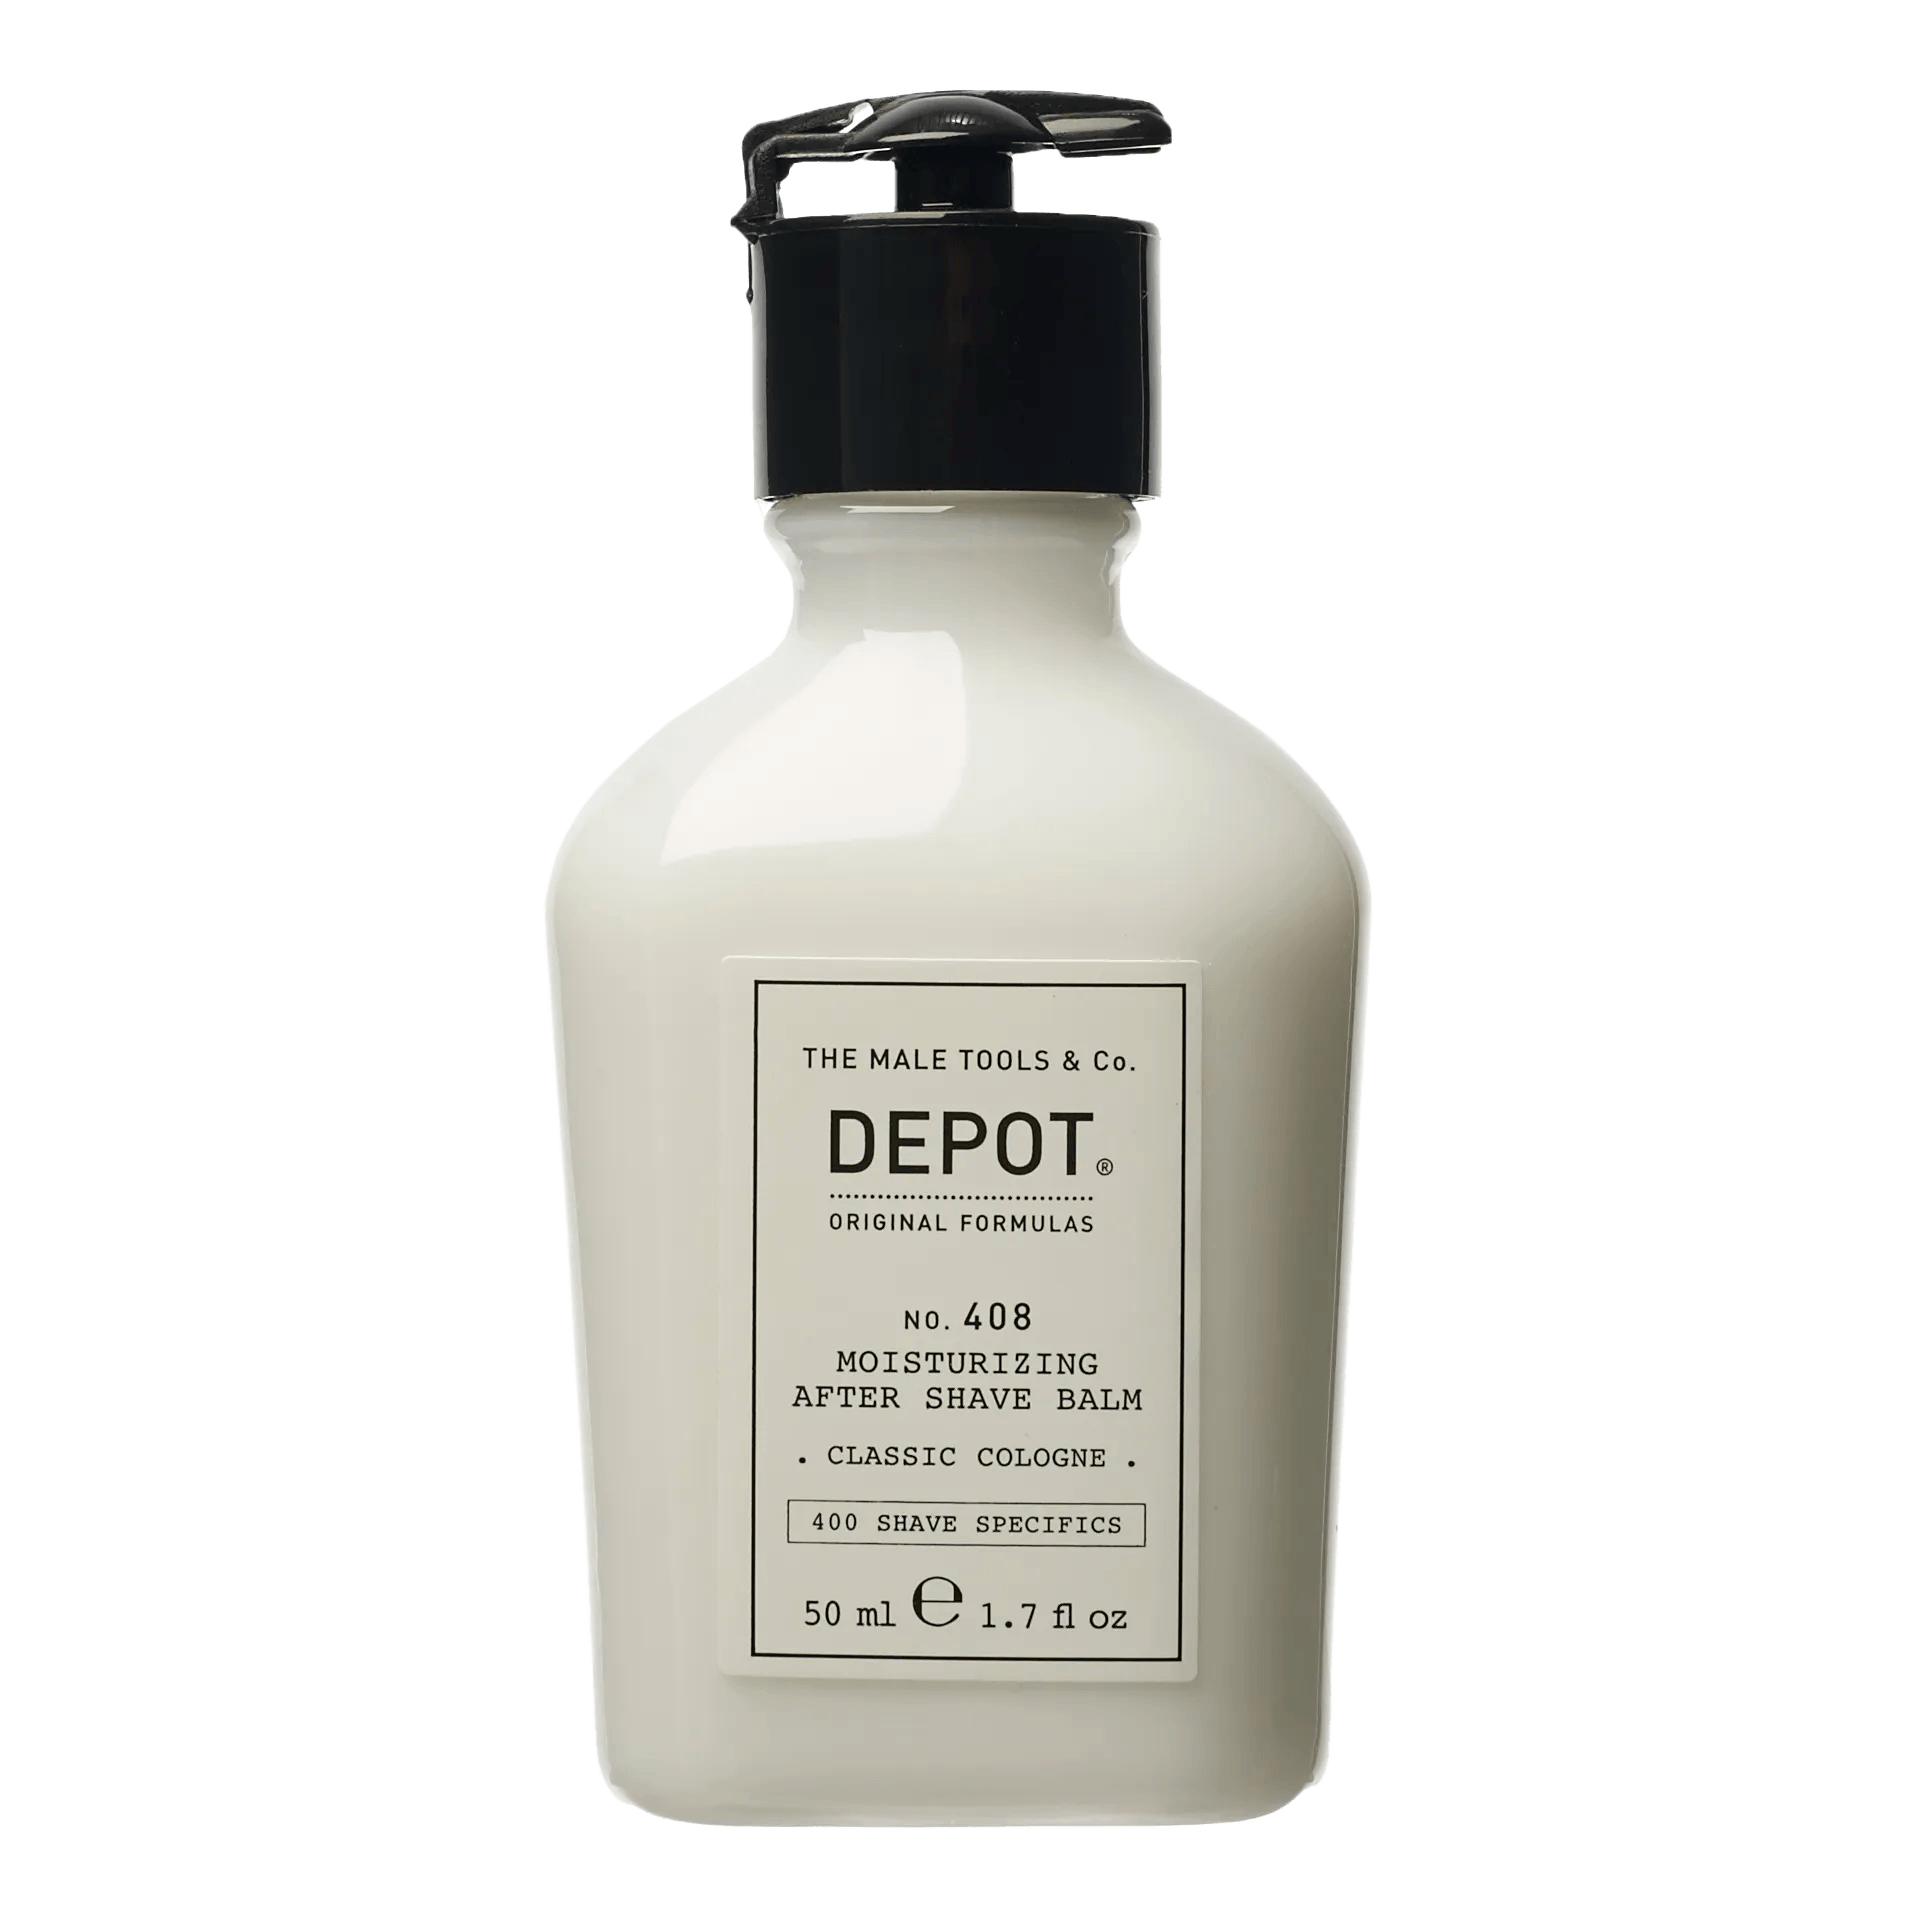 Depot No. 408 Moisturizing After Shave Balm - Classic Cologne 50 ml